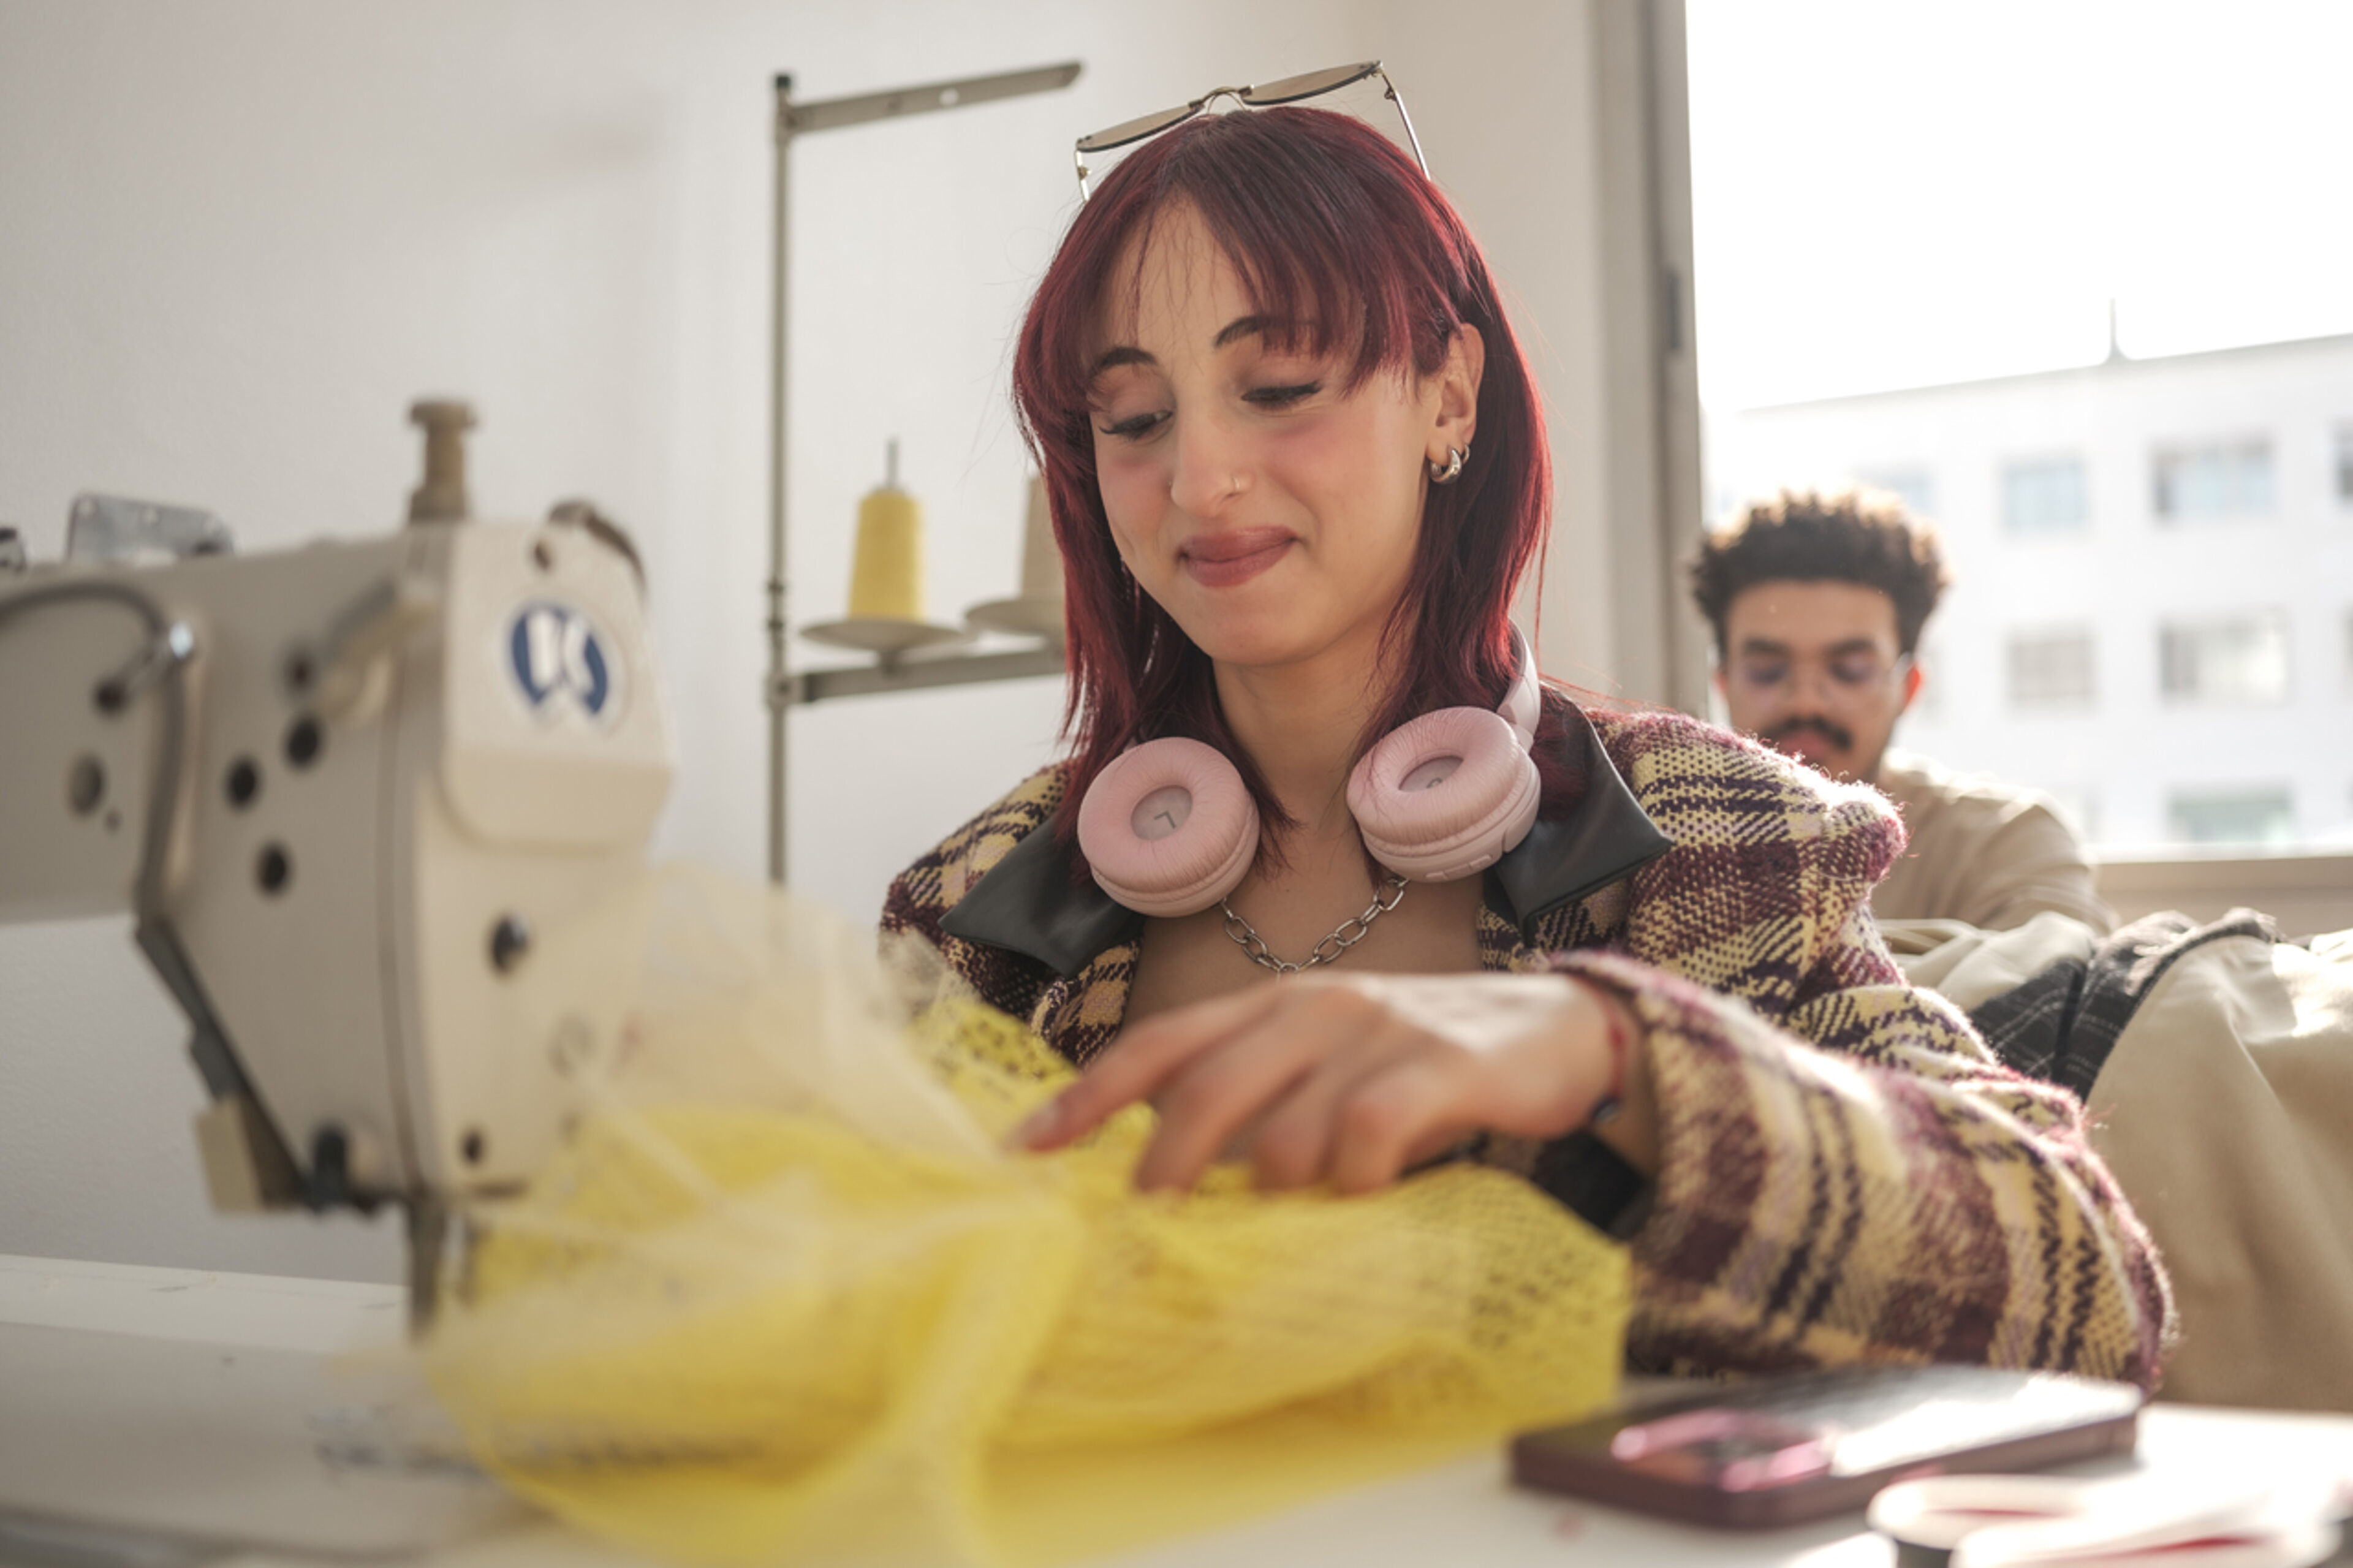 A focused seamstress with red hair sews yellow fabric on an industrial sewing machine.